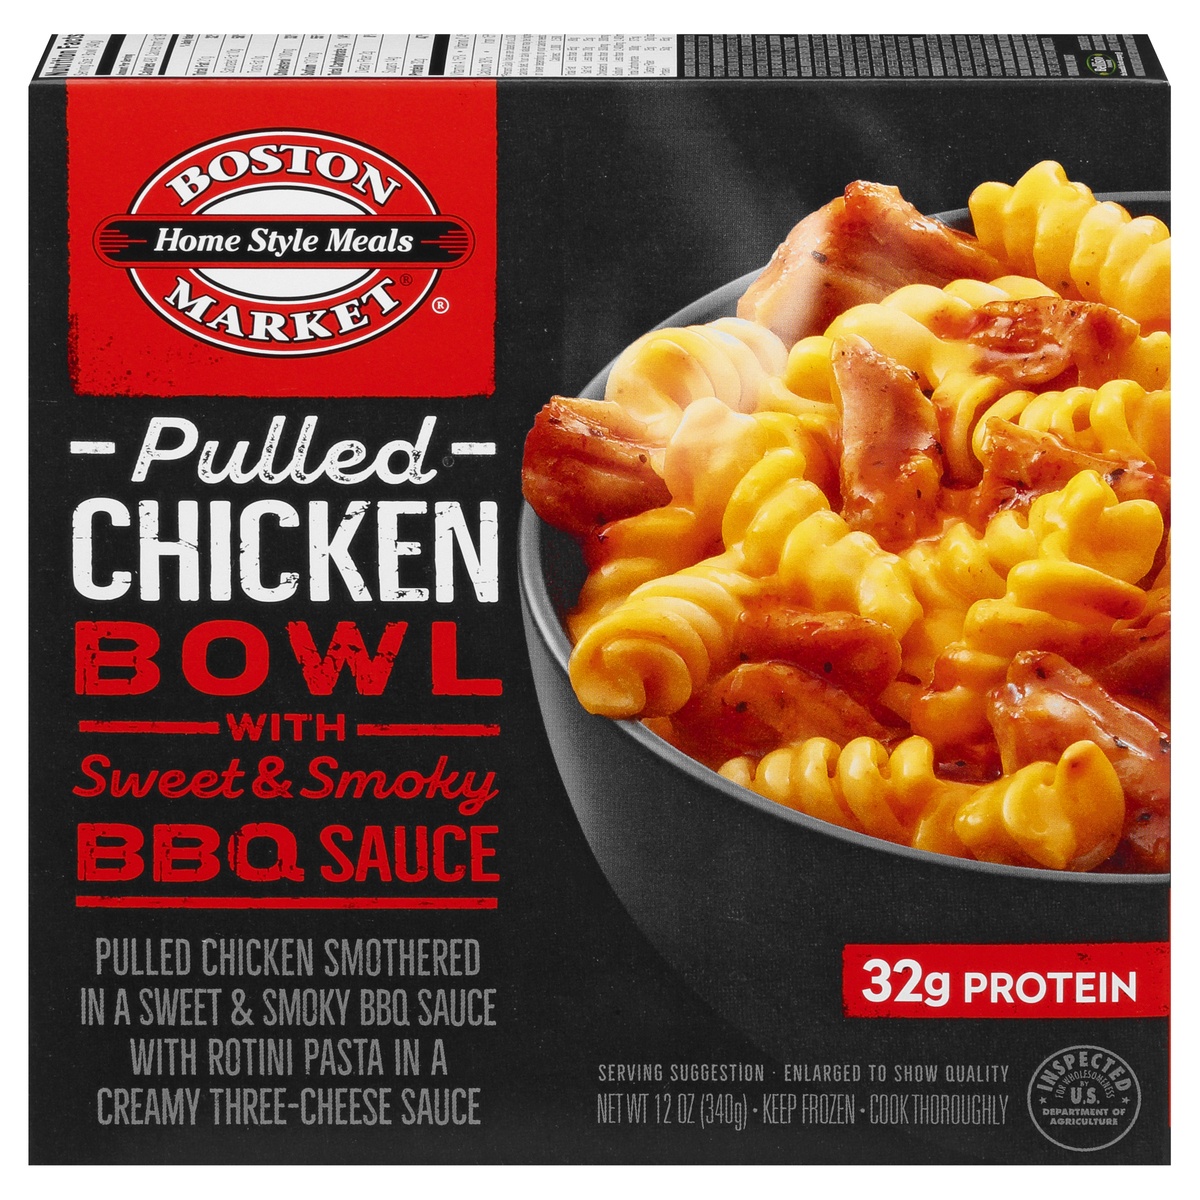 slide 1 of 11, Boston Market Home Style Meals Pulled Chicken Bowl with Sweet & Smoky BBQ Sauce, 12 oz